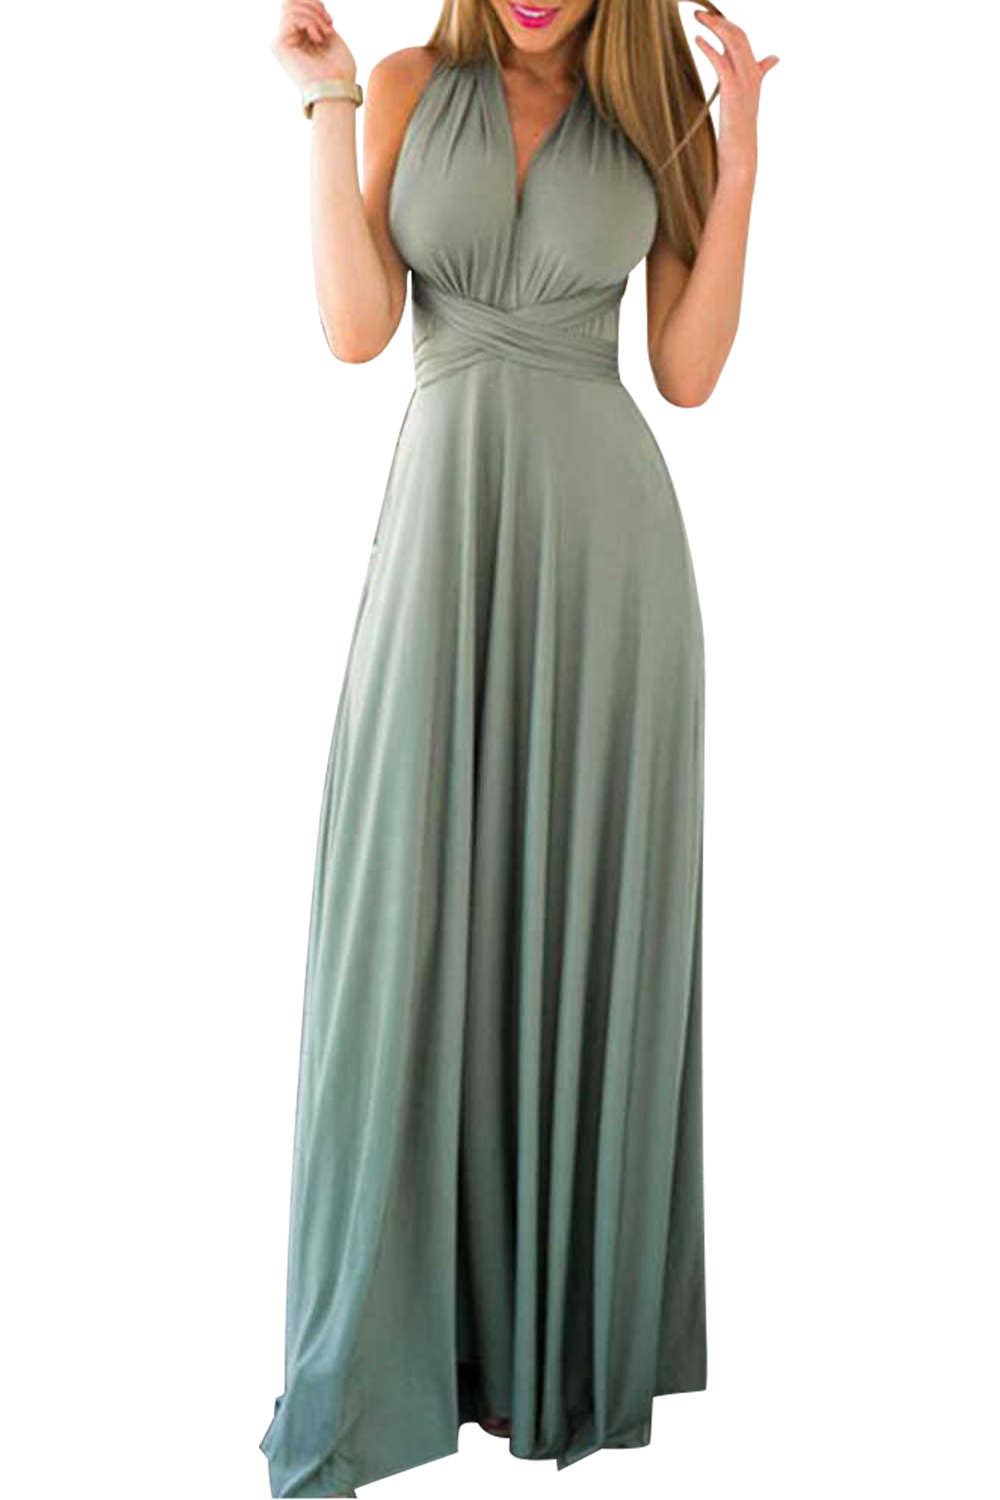 Iyasson Backless Front-Slit Cheap Long Prom Dress